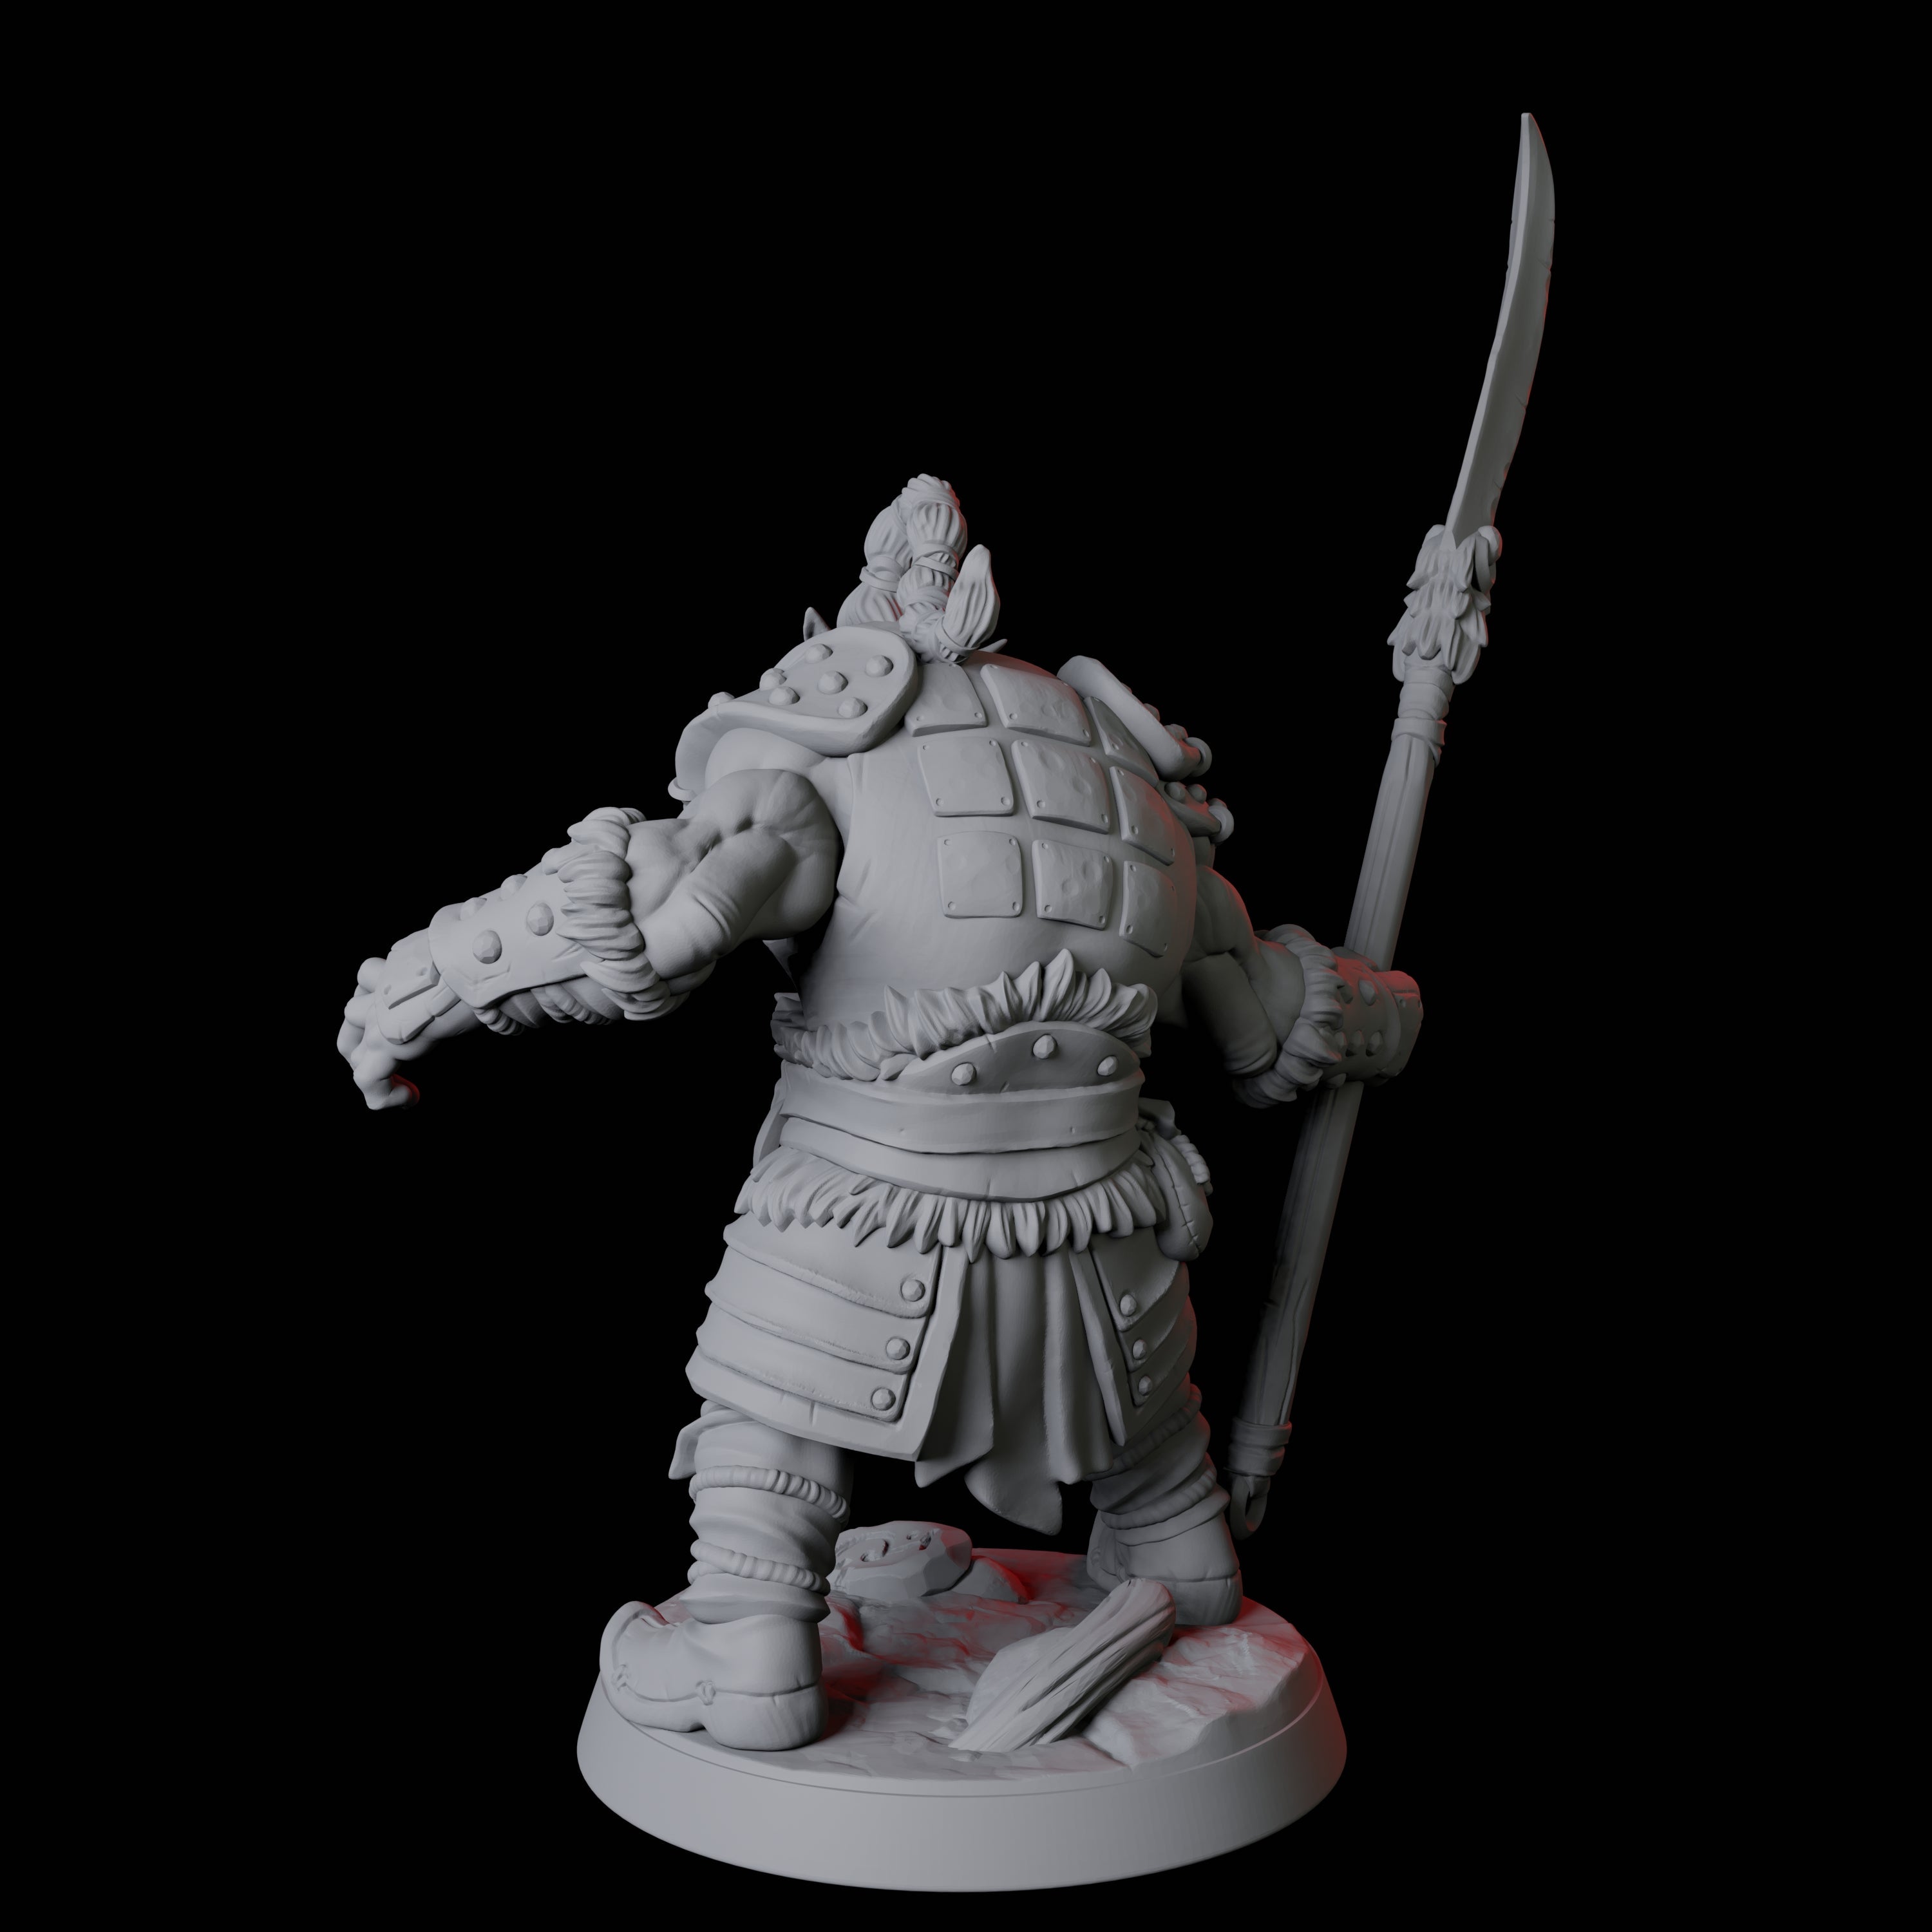 Mountain Orc Warrior C Miniature for Dungeons and Dragons, Pathfinder or other TTRPGs